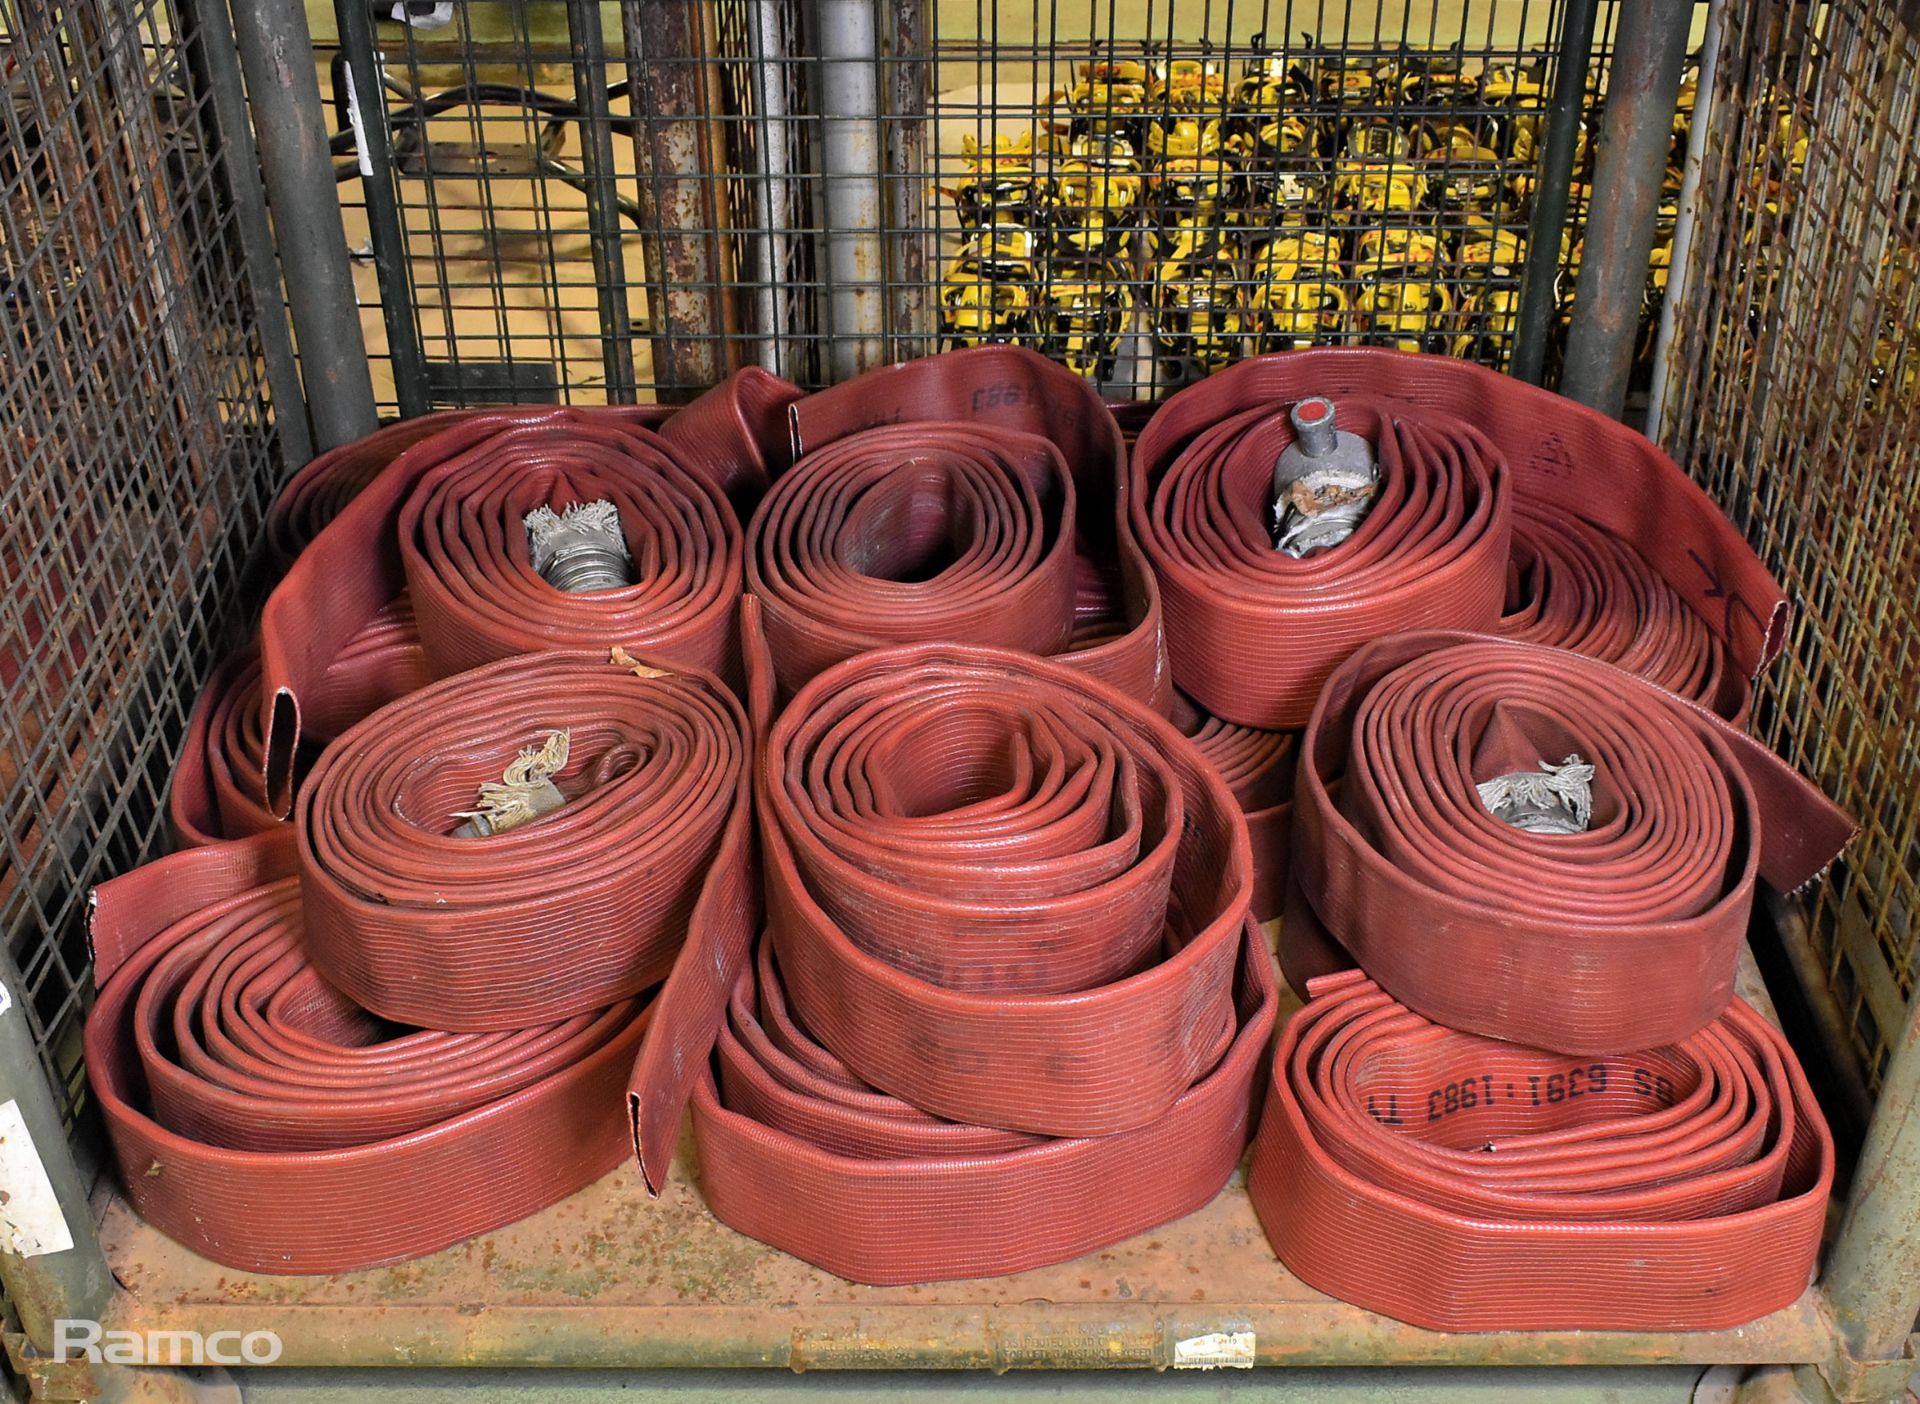 16x red layflat fire hoses - mixed sizes - some missing couplings